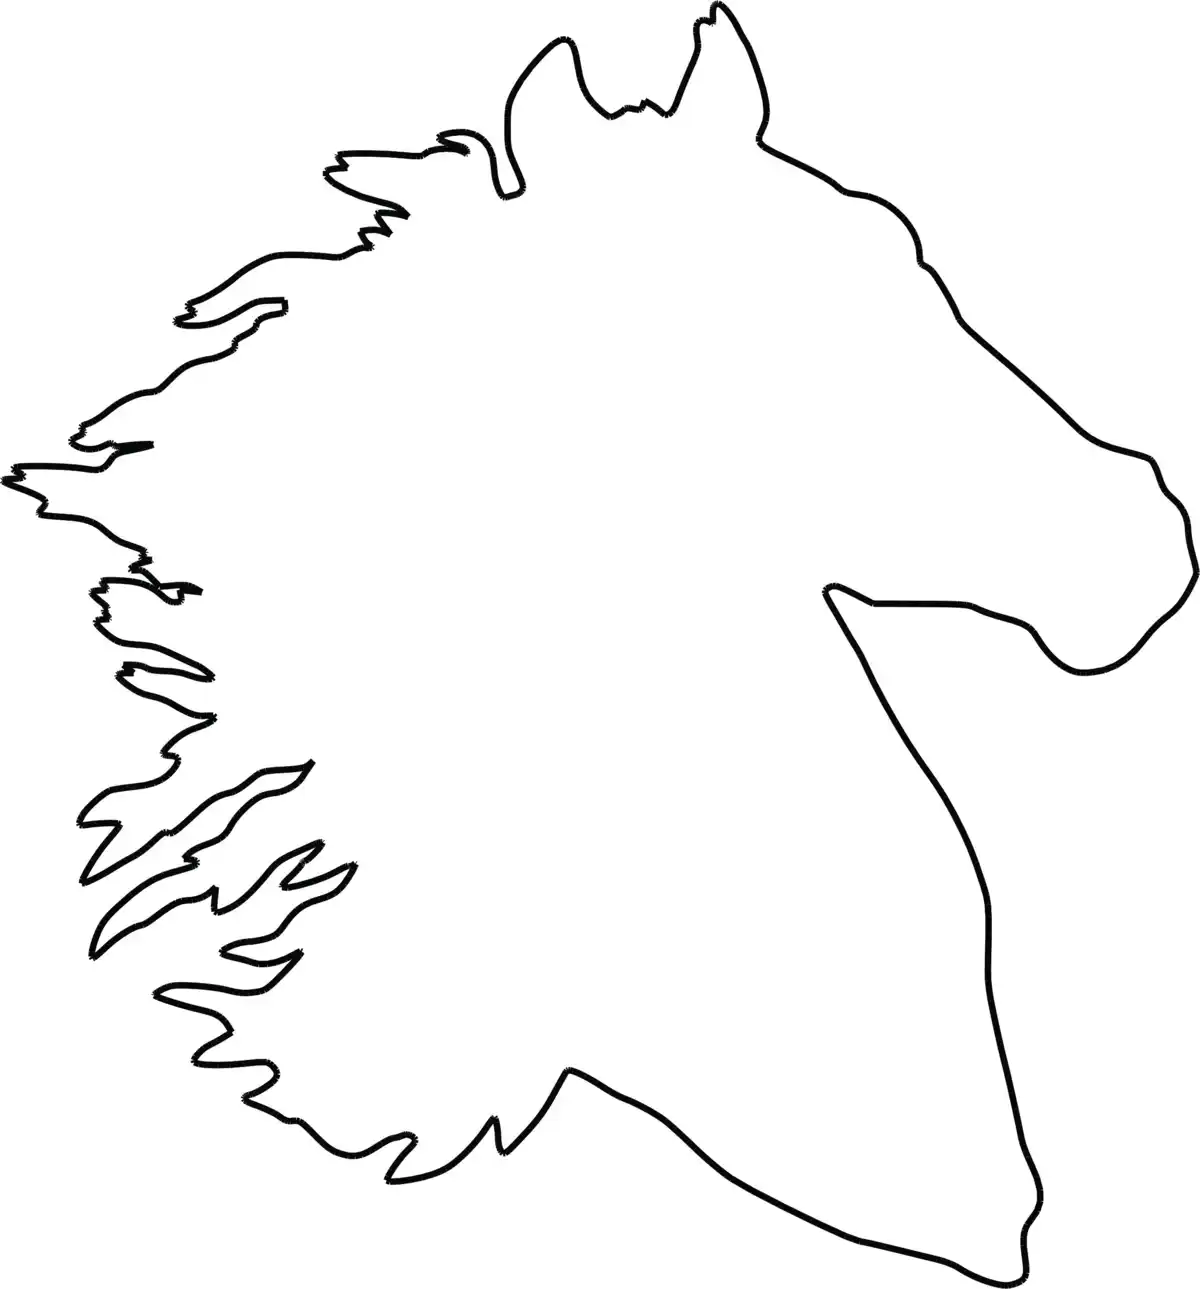 Free Coloring Pages PDF, Horse Head Silhouette Kids Coloring Pages Pdf